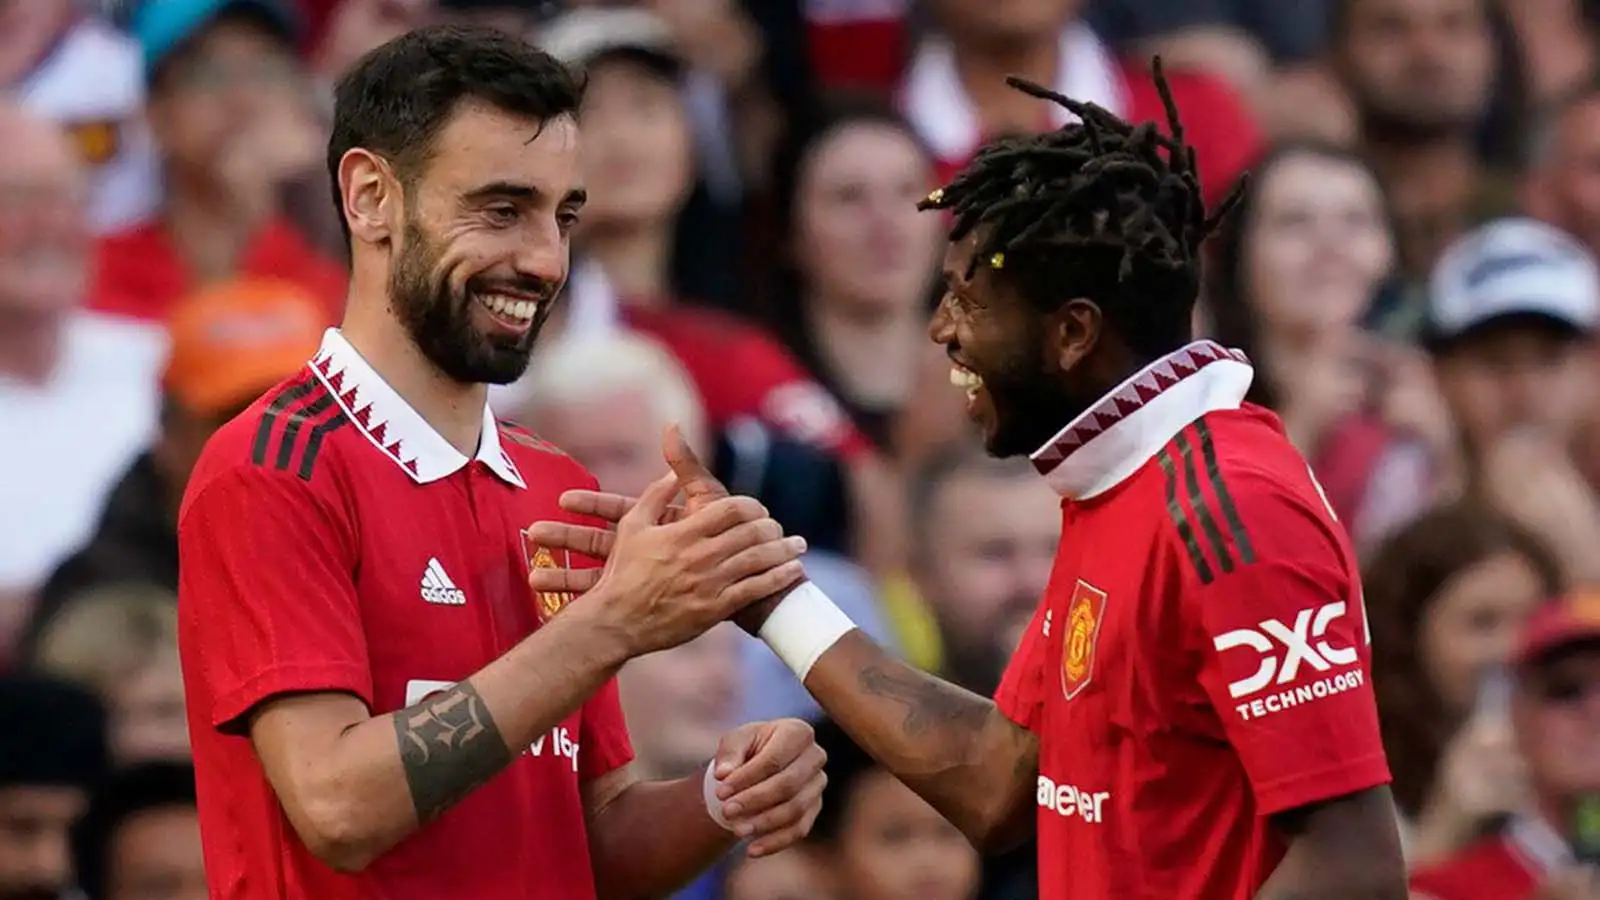 Bruno Fernandes of Manchester United celebrates scoring their second goal with Fred of Manchester United during the Premier League match at Old Trafford, Manchester.